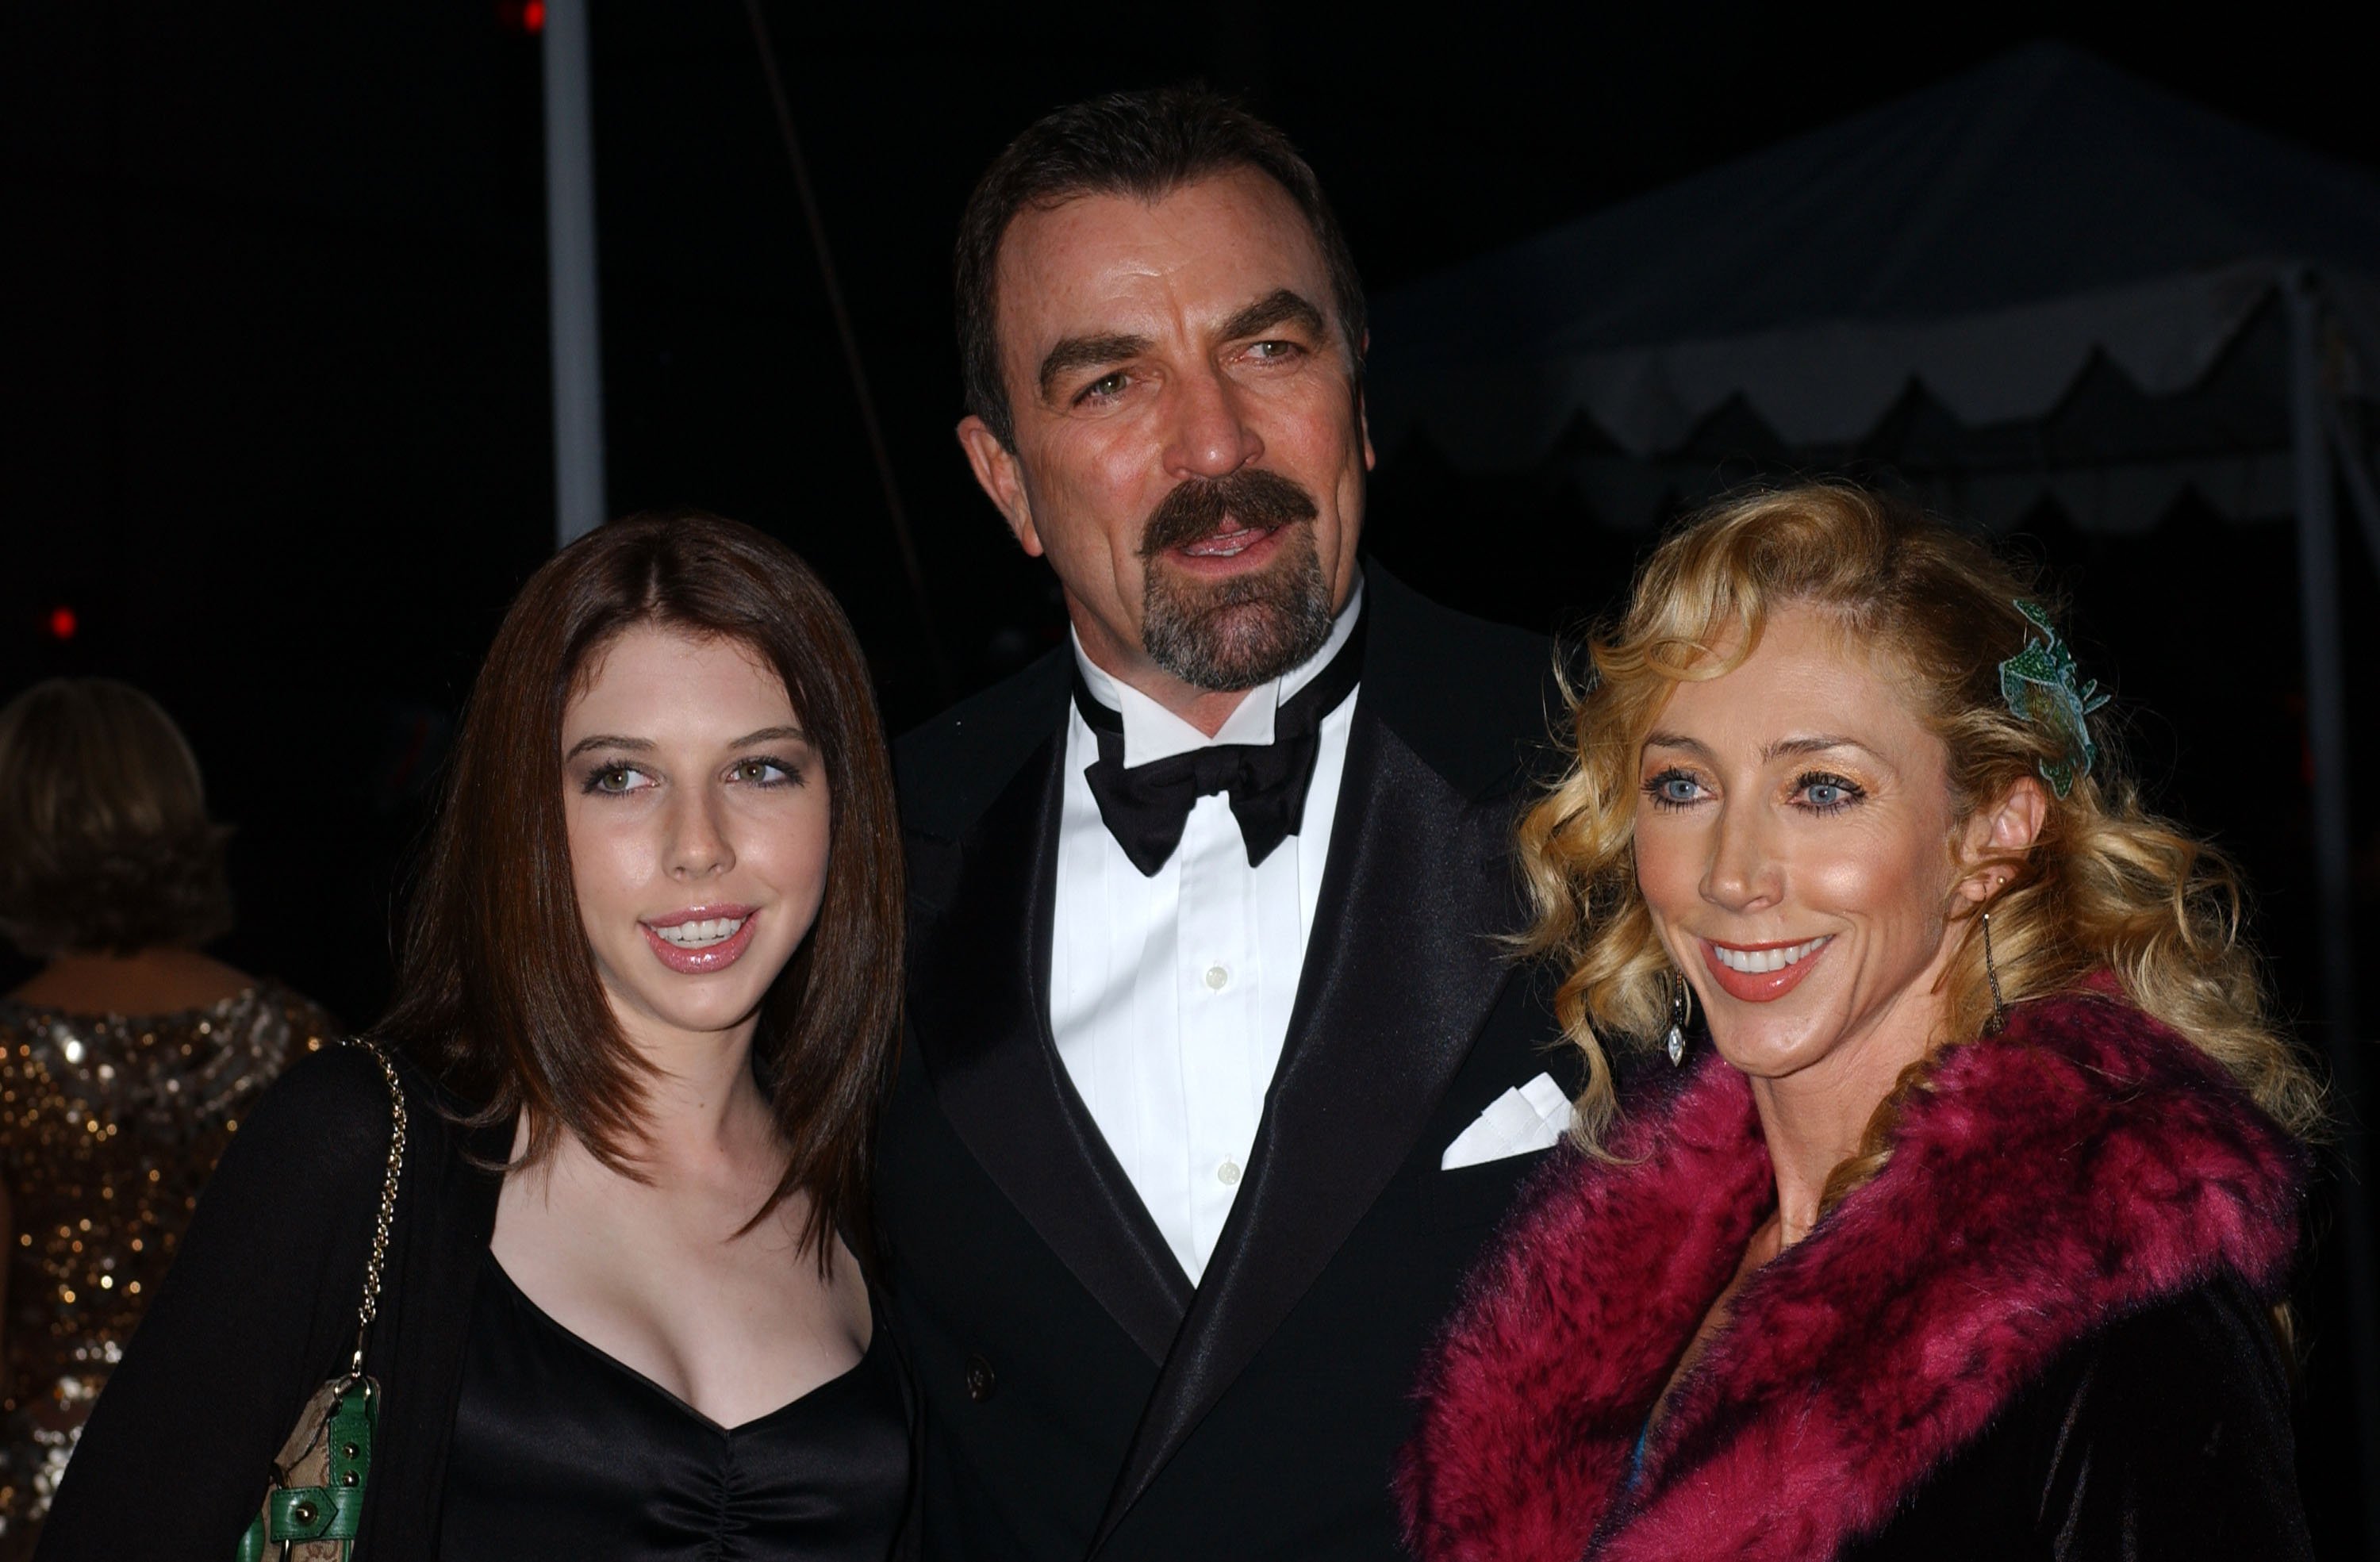 Tom Selleck (center), daugher Hannah (left) and wife Jillie Mack (right). | Source: Getty Images